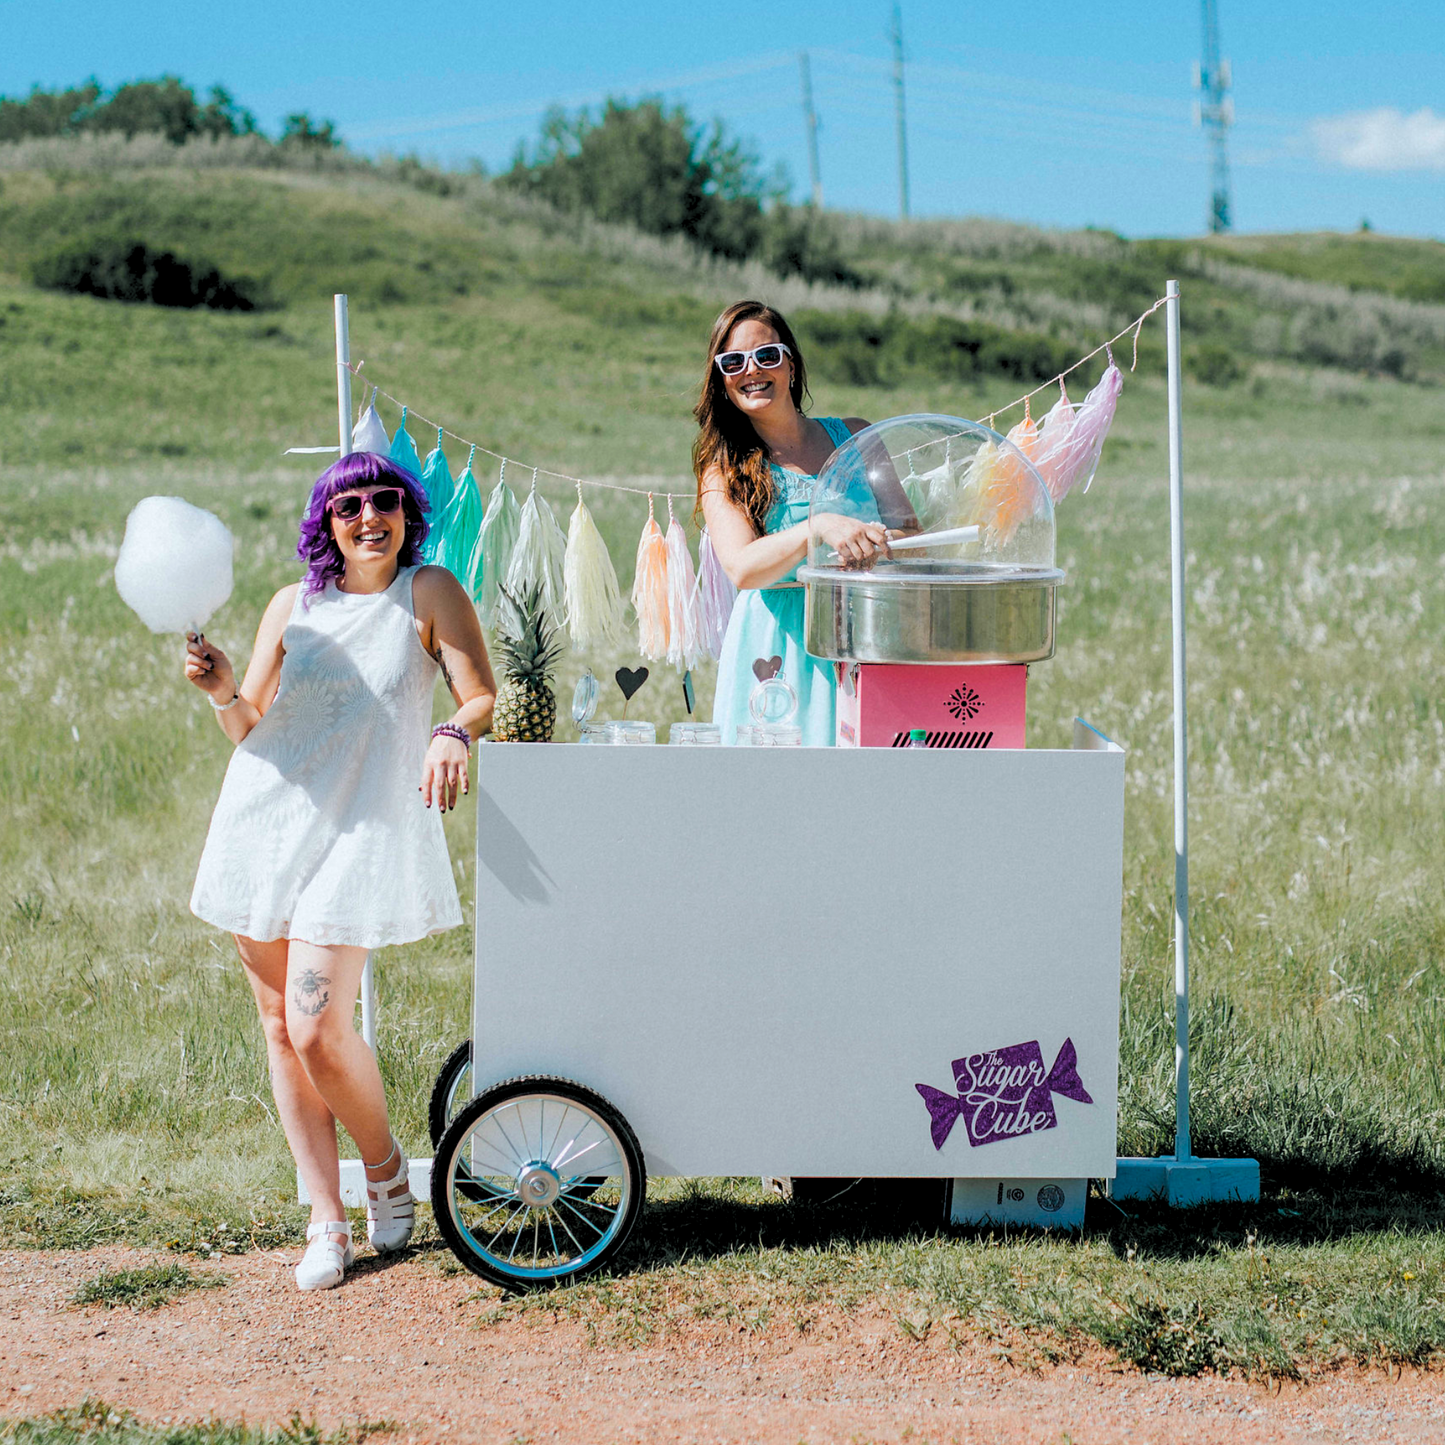 Our Live Cotton Candy Cart Experience